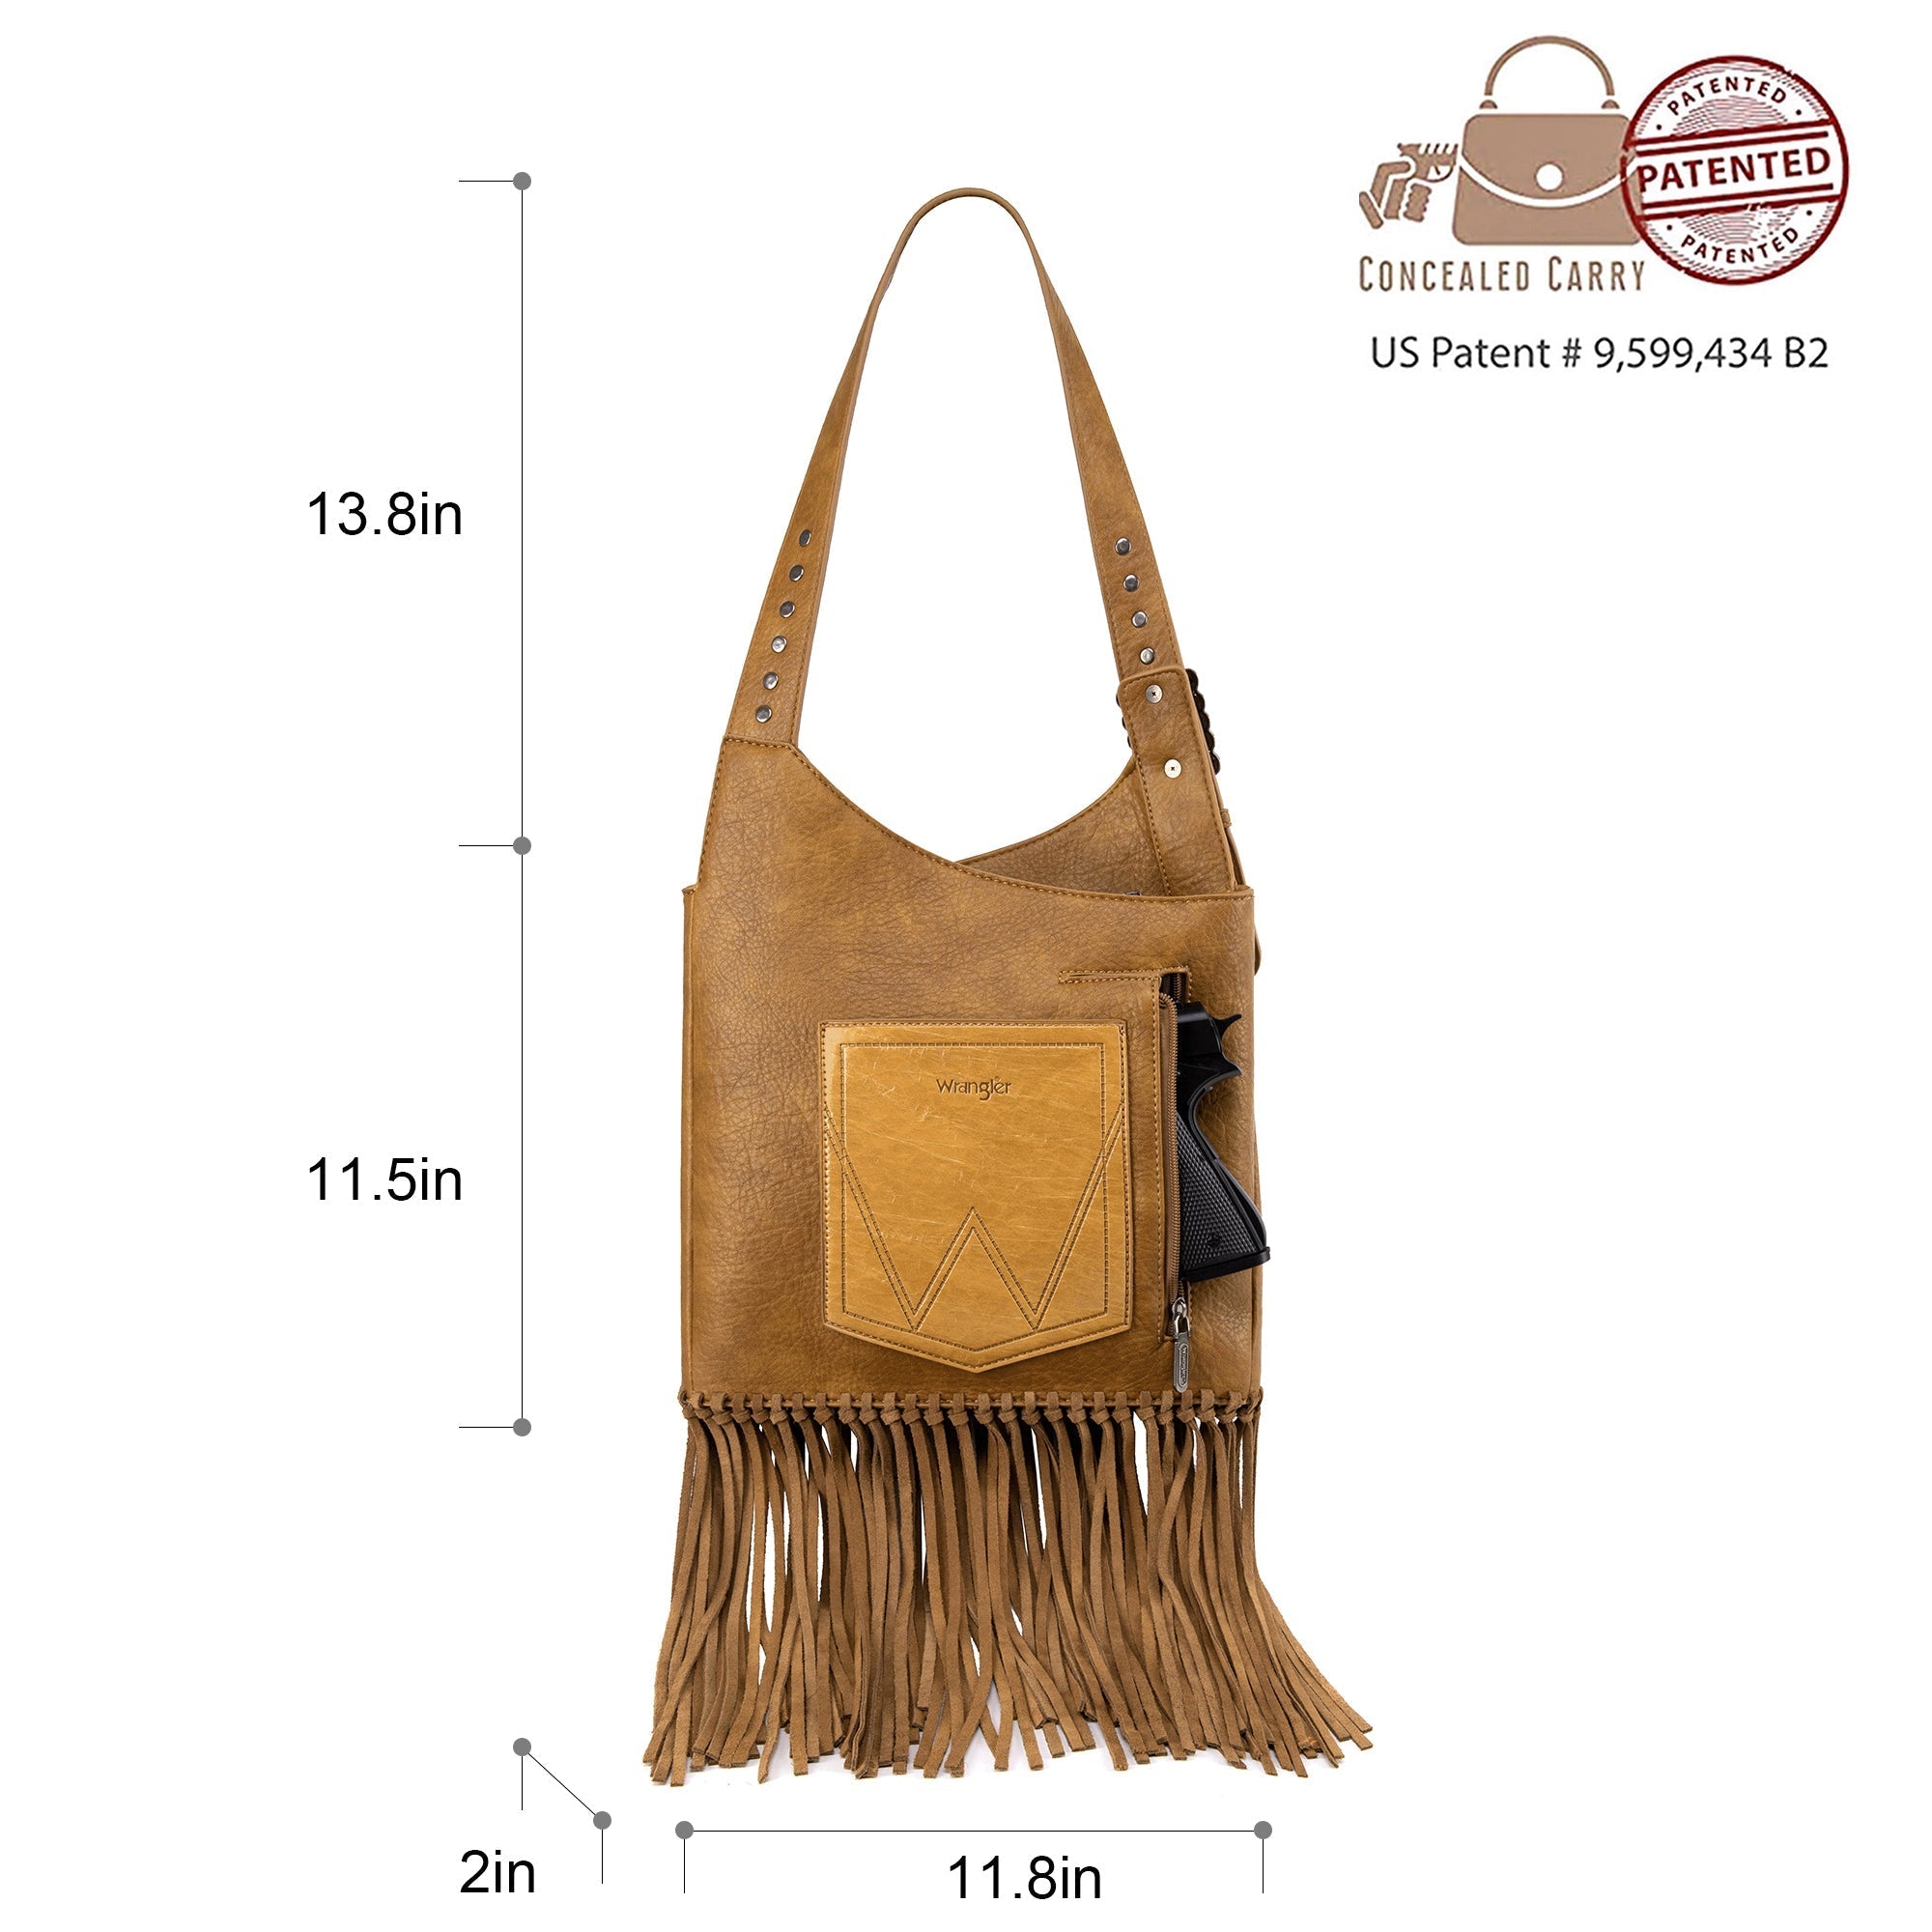 Wrangler Turquoise Stone Concho Fringe Hobo And Crossbody Clutch Collection - Montana West World